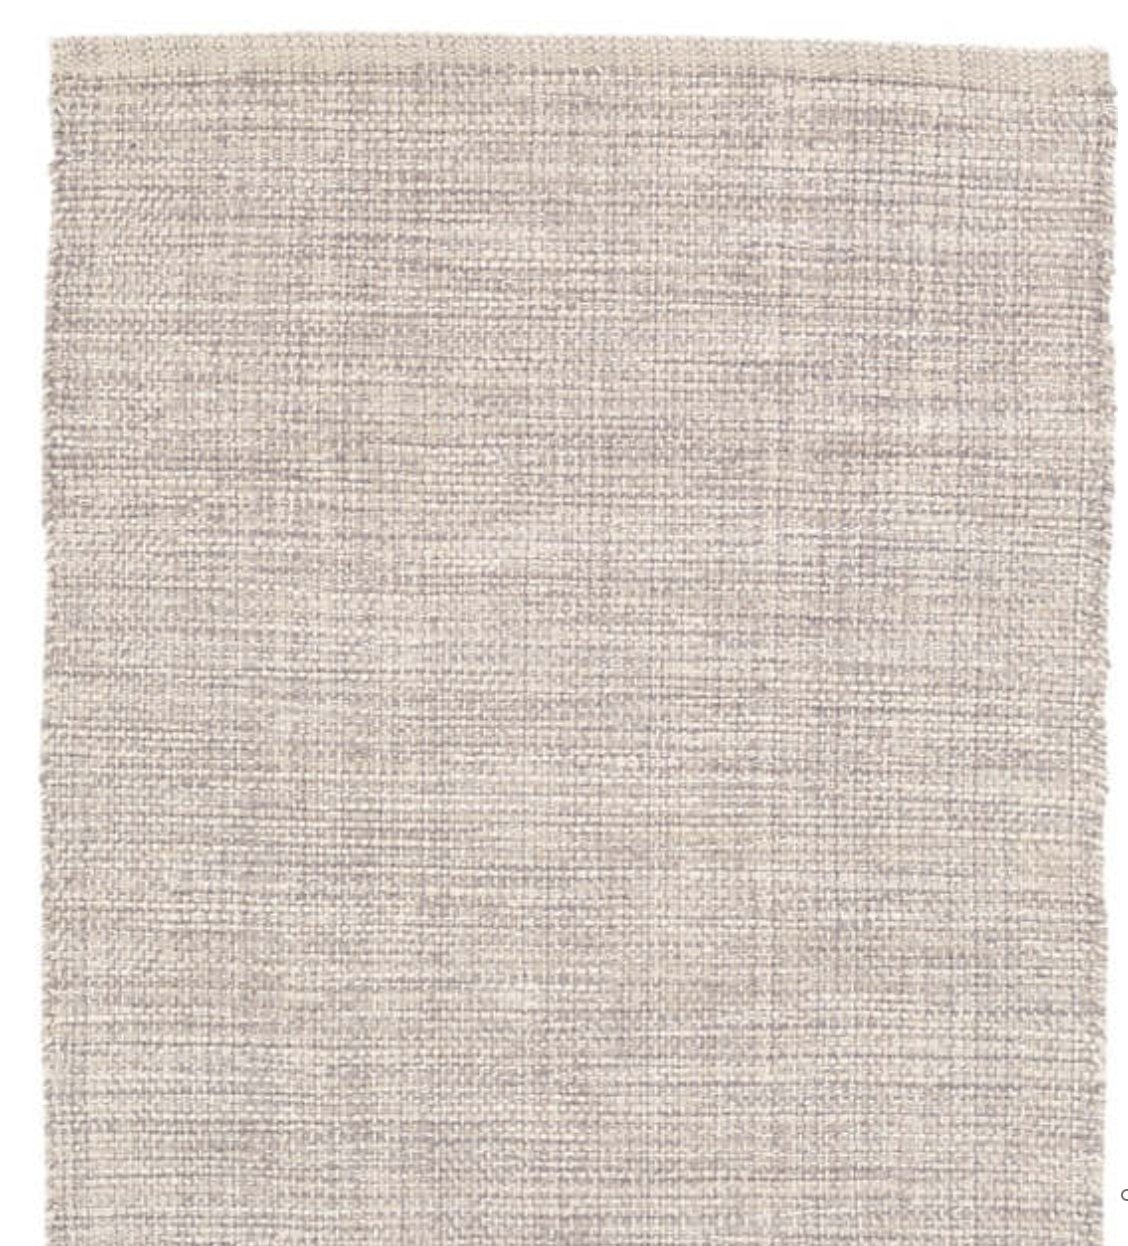 Marled Gray Woven Cotton Rug, 9' x 12' - Image 0